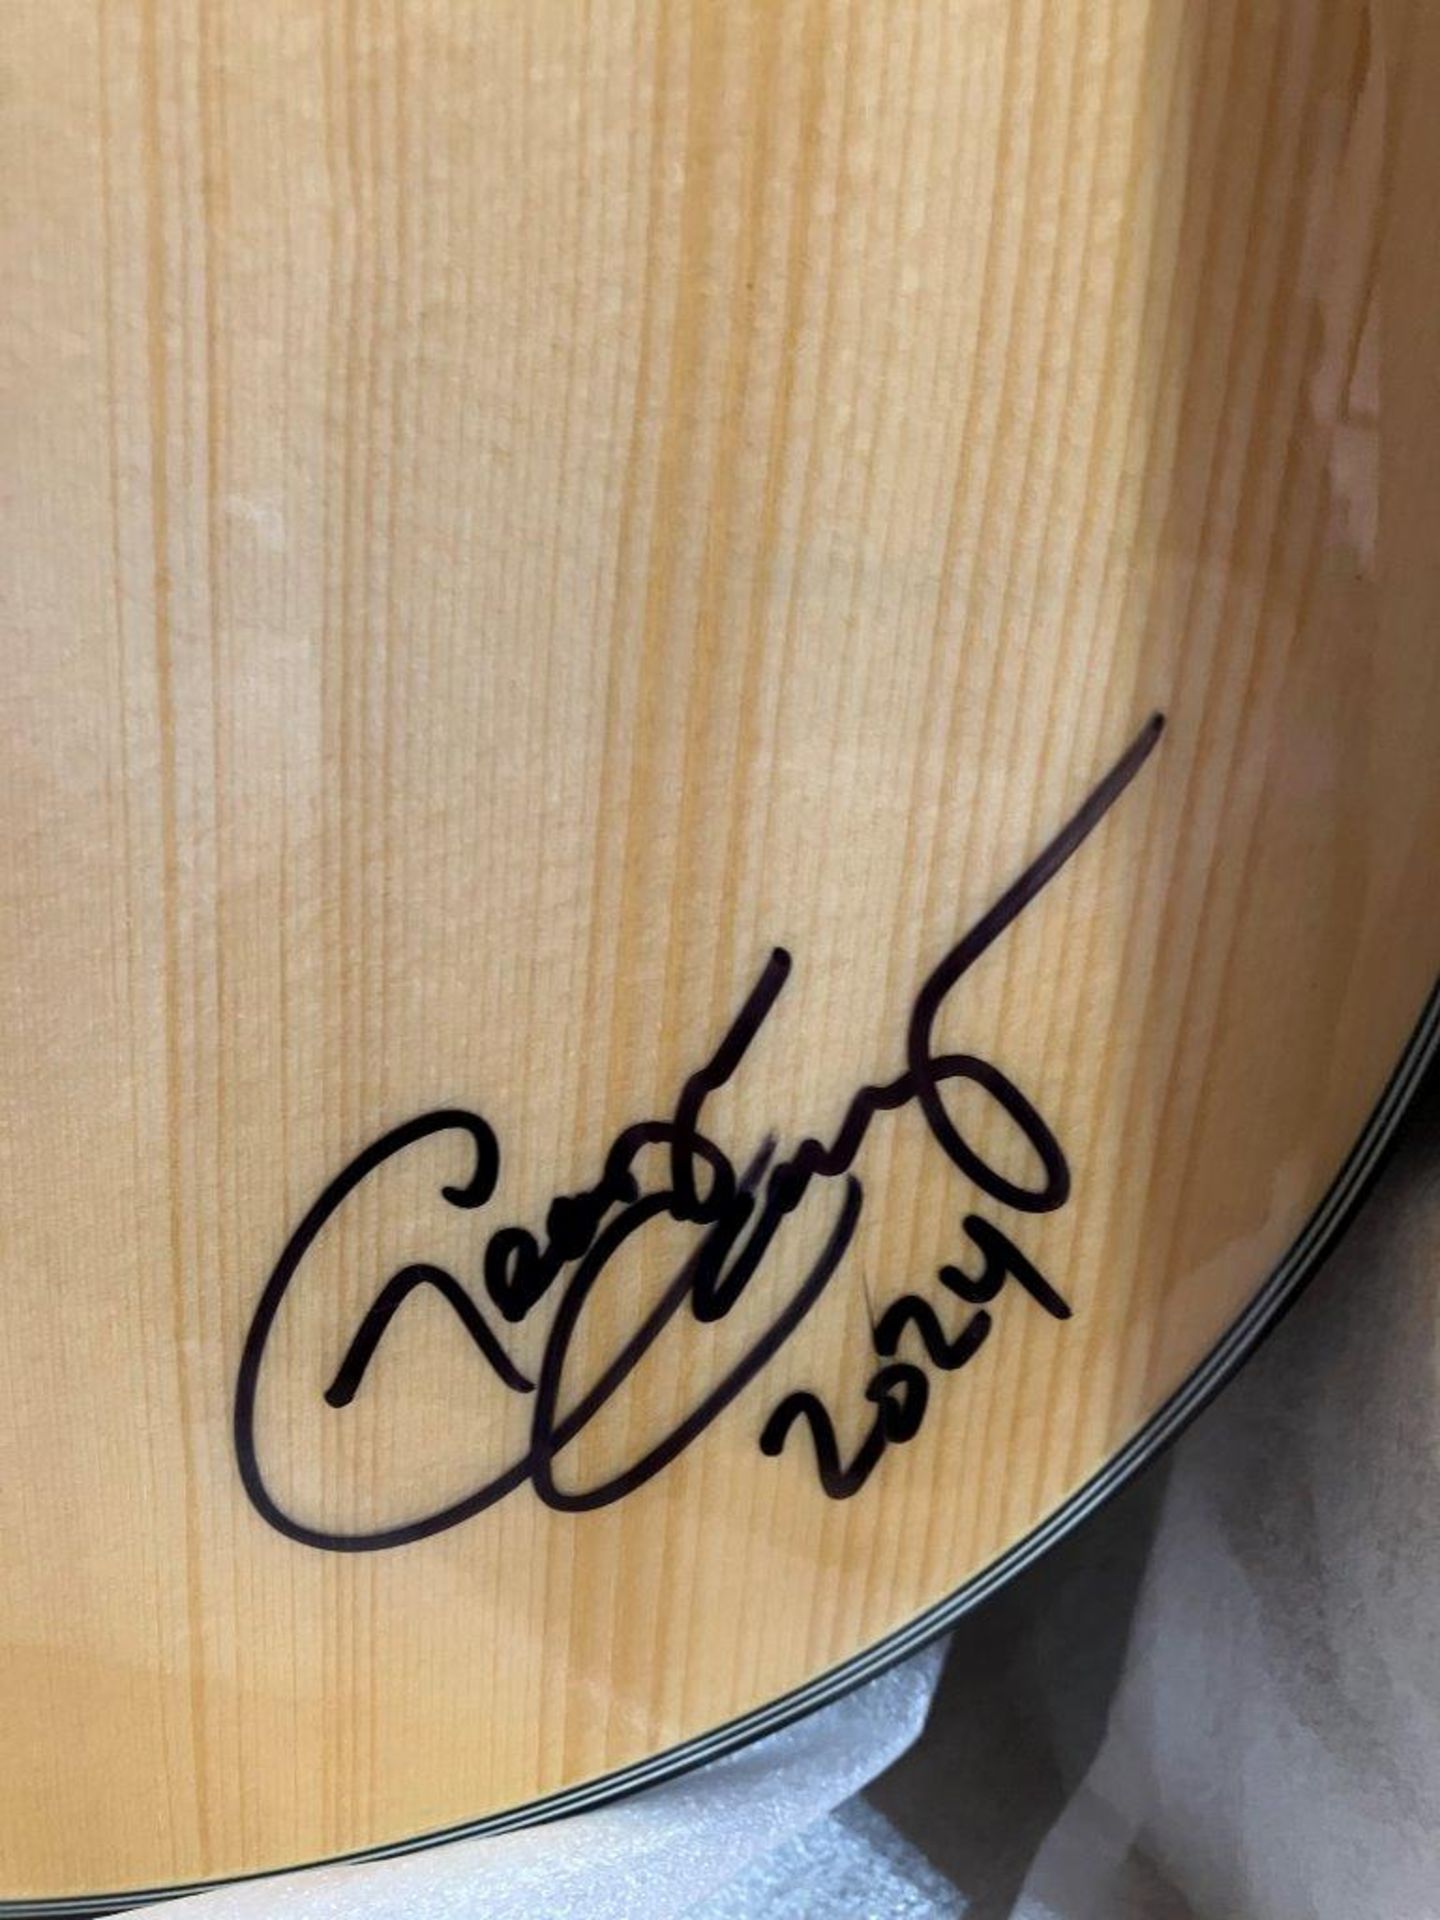 YAHAMA ACOUSTIC GUITAR SIGNED BY COUNTRY MUSICIANS - Image 5 of 5